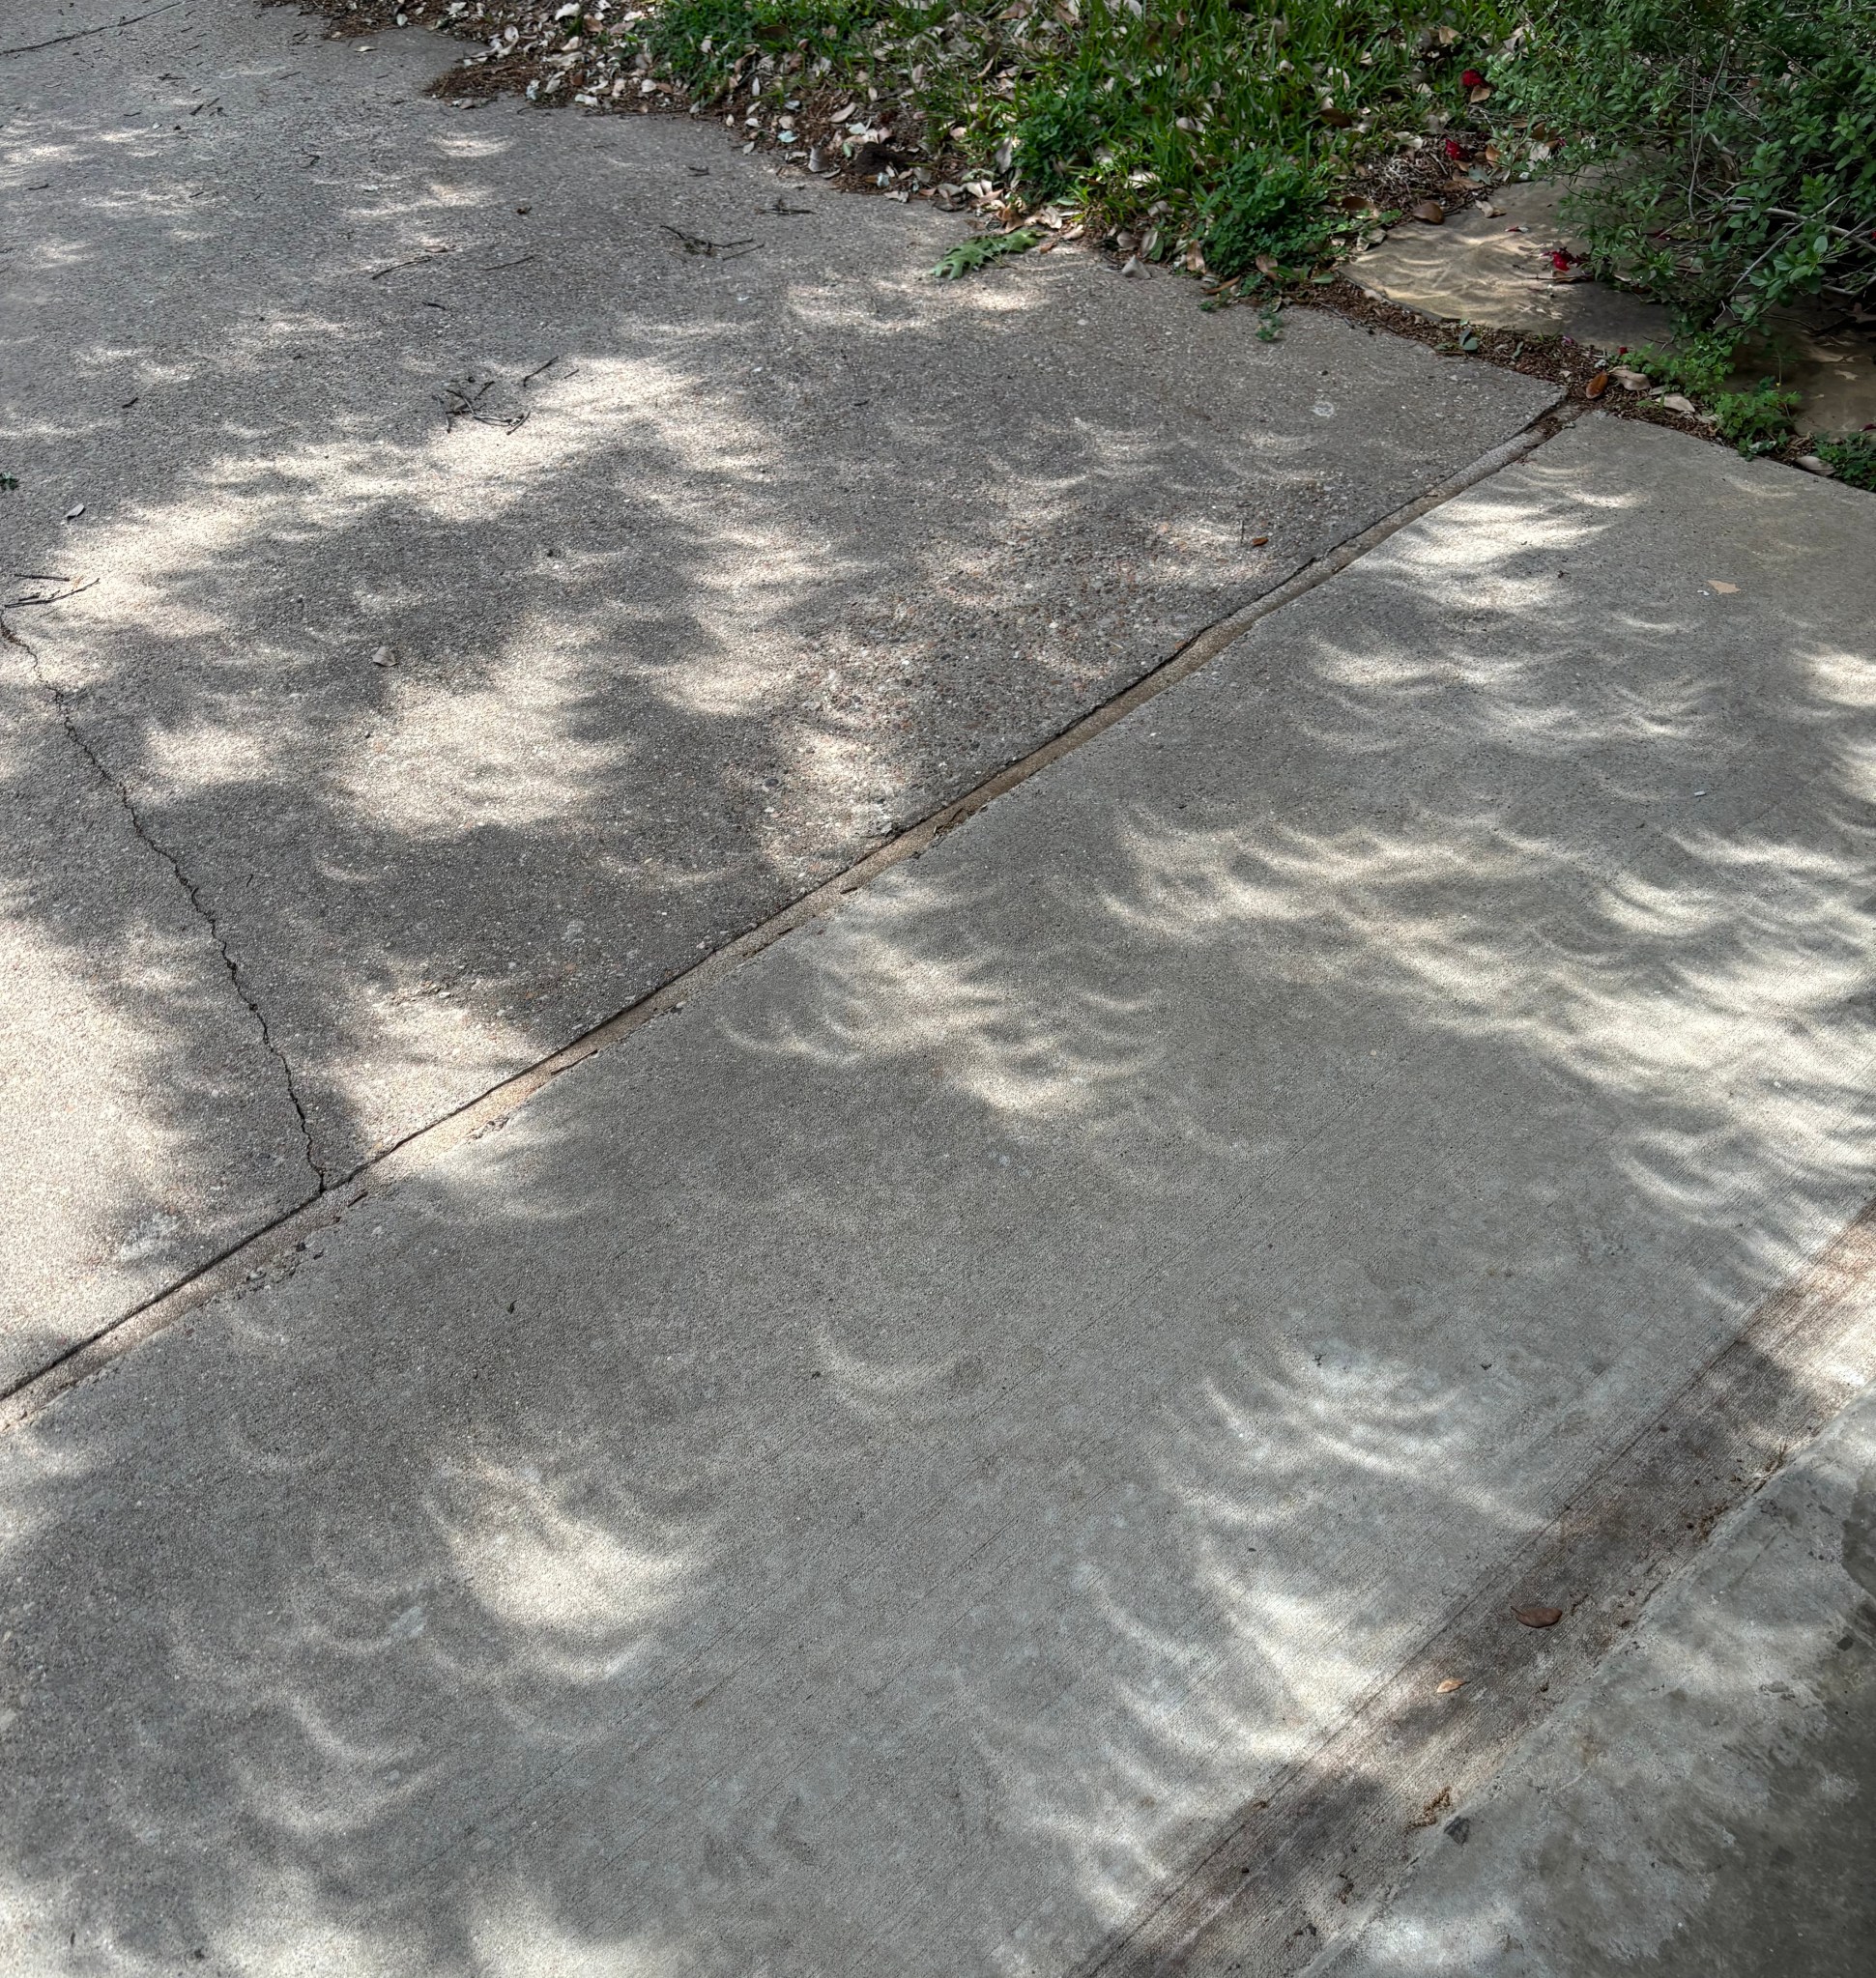 This is a photo of a sidewalk during an eclipse. As the Moon begins to eclipse the Sun, you can observe a pinhole camera effect